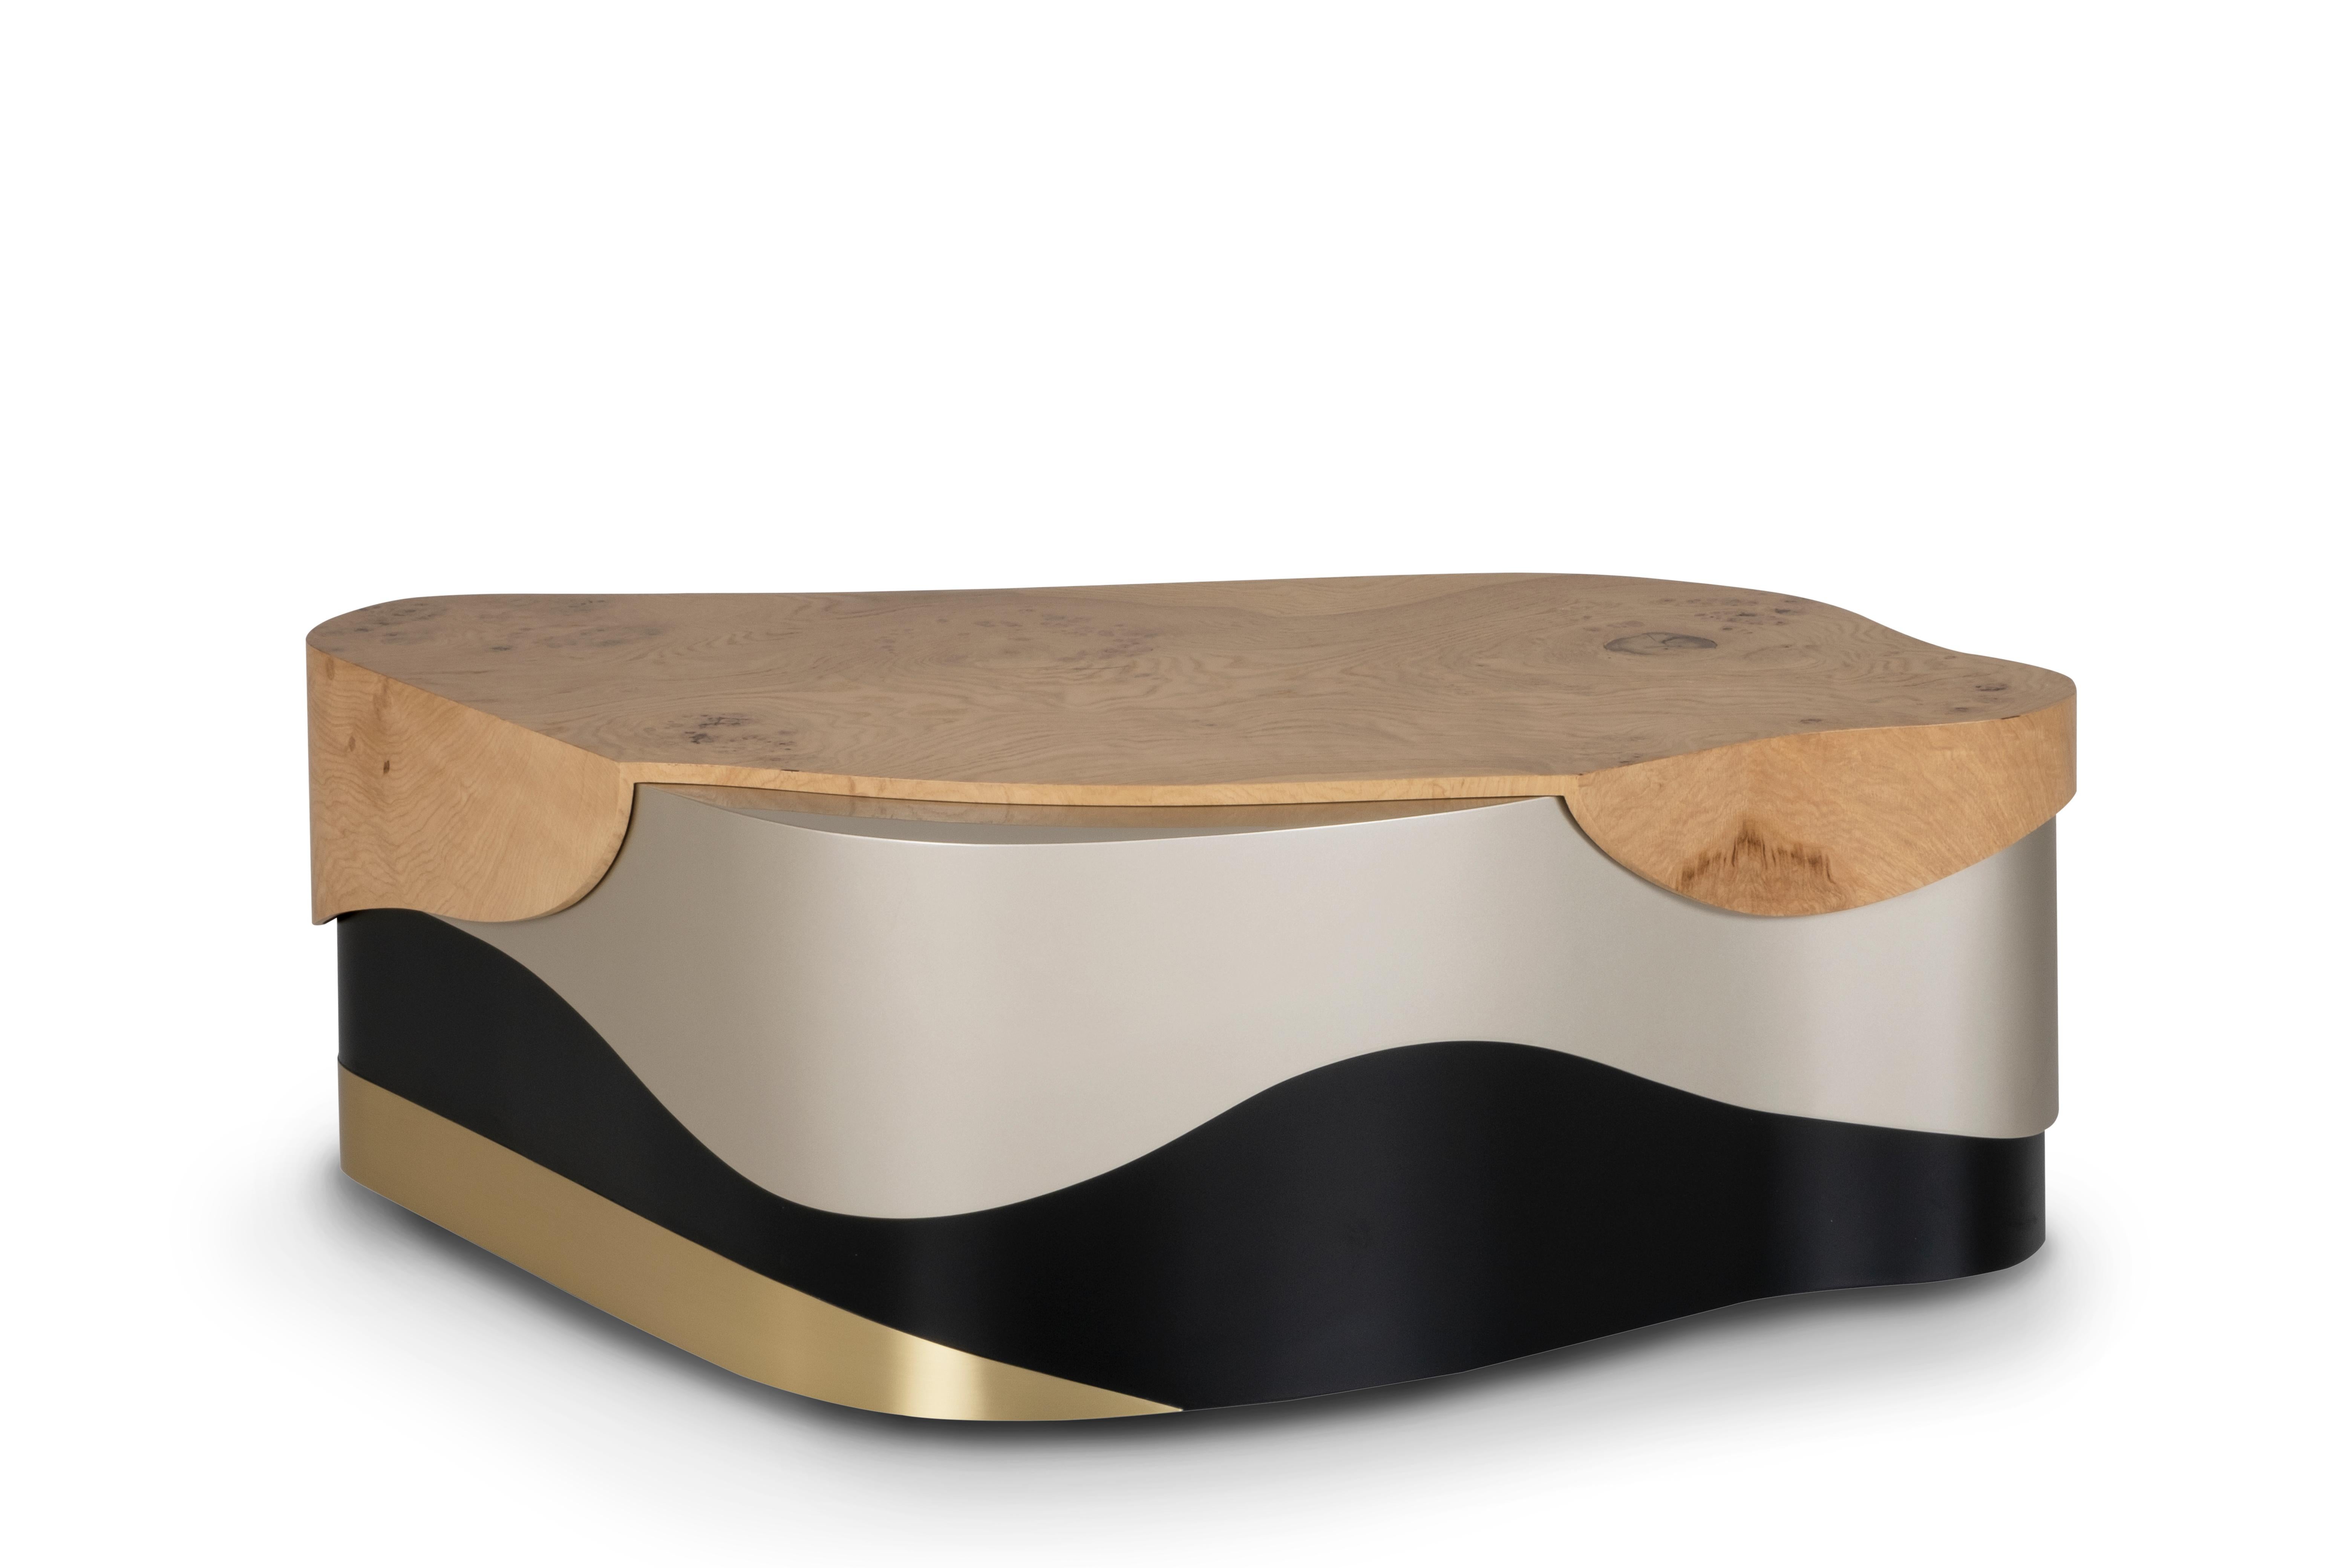 Sistelo Coffee Table, Contemporary Collection, Handcrafted in Portugal - Europe by Greenapple.

In perfect harmony with Sistelo’s breathtaking landscape, this side table incorporates the shapes and forms of the Portuguese hidden gem on the outskirts